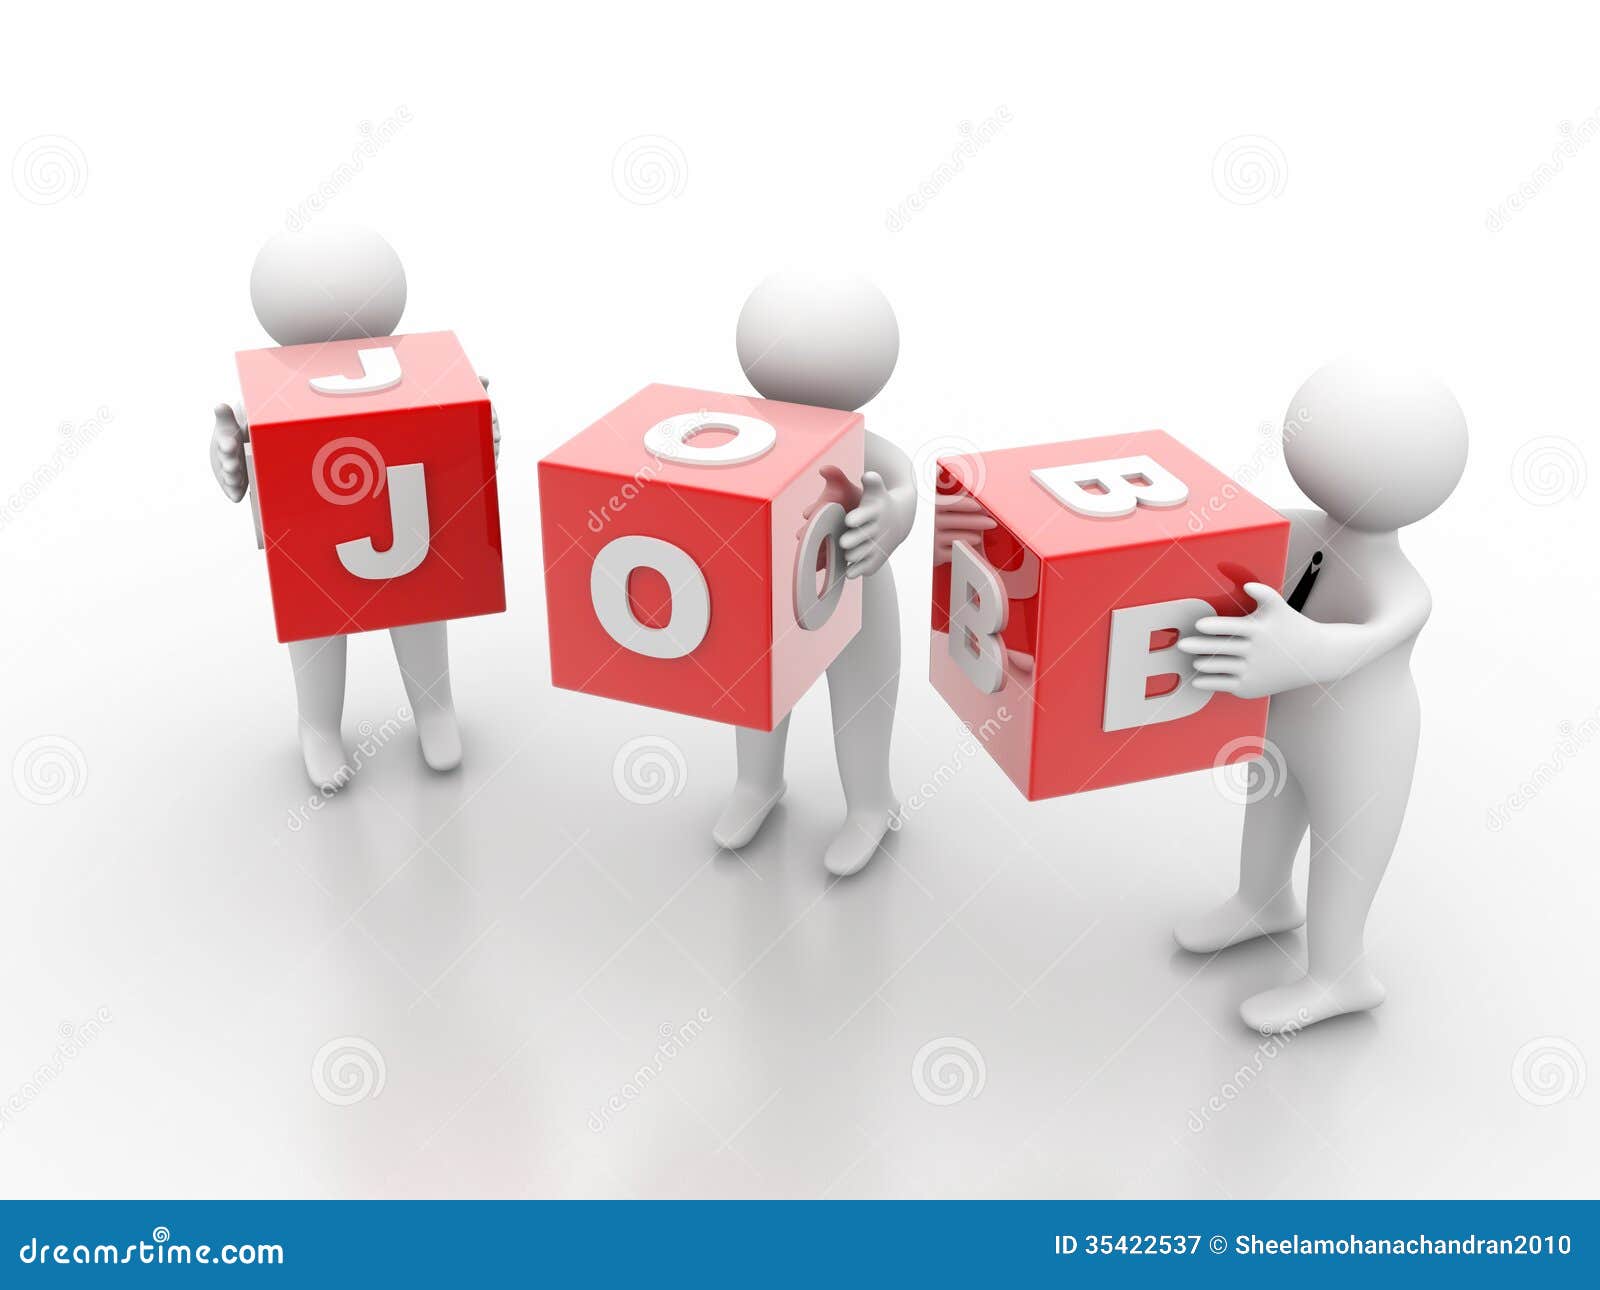 Download this Job Search Icon picture